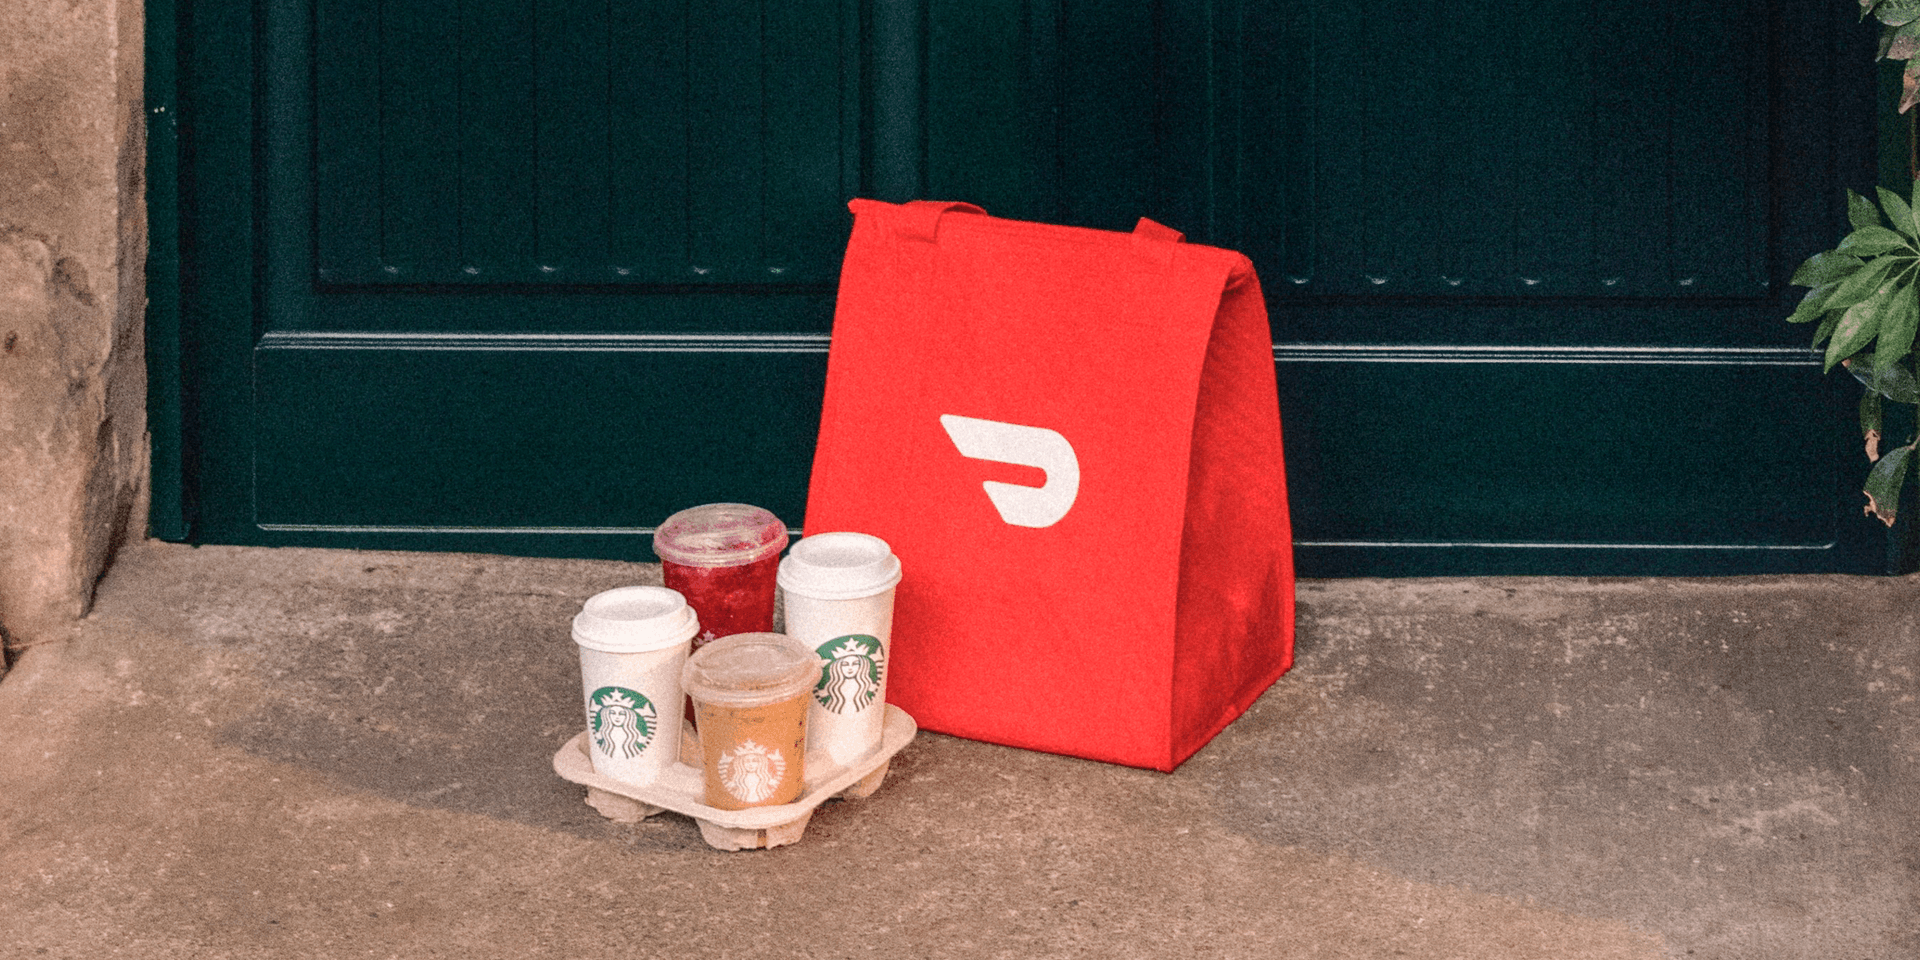 Starbucks Taps Online Ordering Market Via iOS, Android Devices By Extending Collaboration With DoorDash